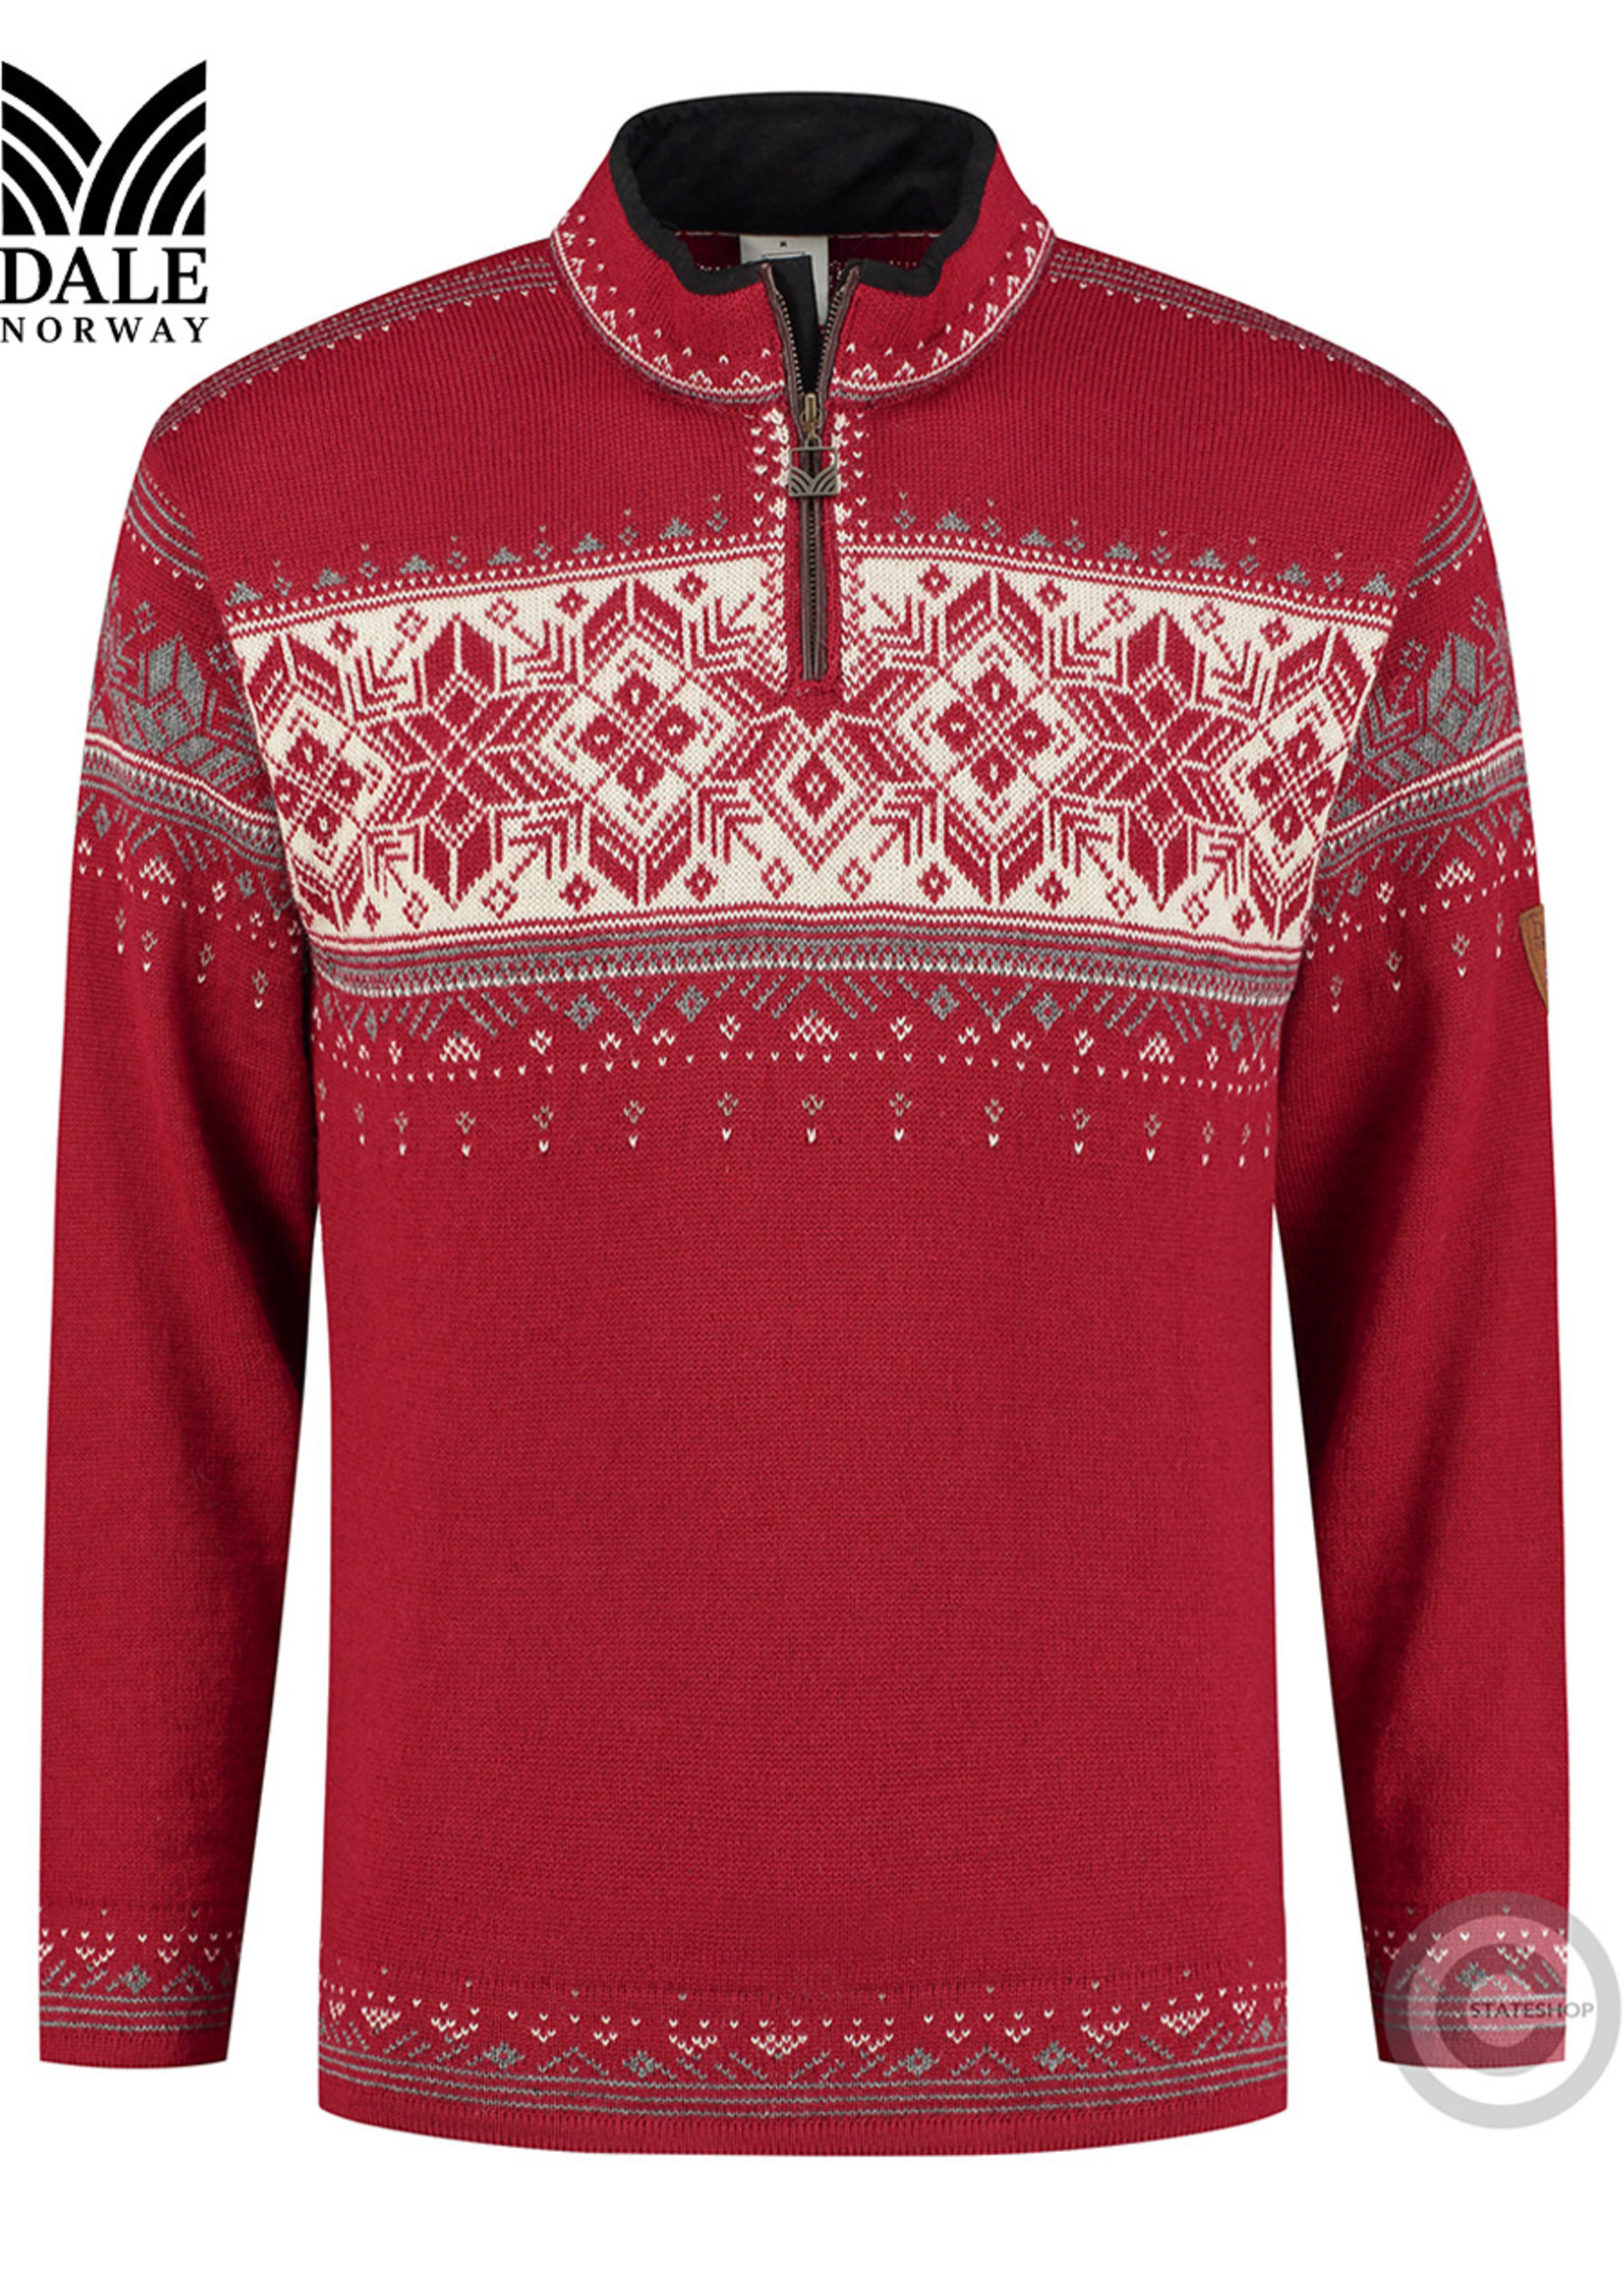 Dale of Norway Dale of Norway ® Pullover "Blyfjell" Rood